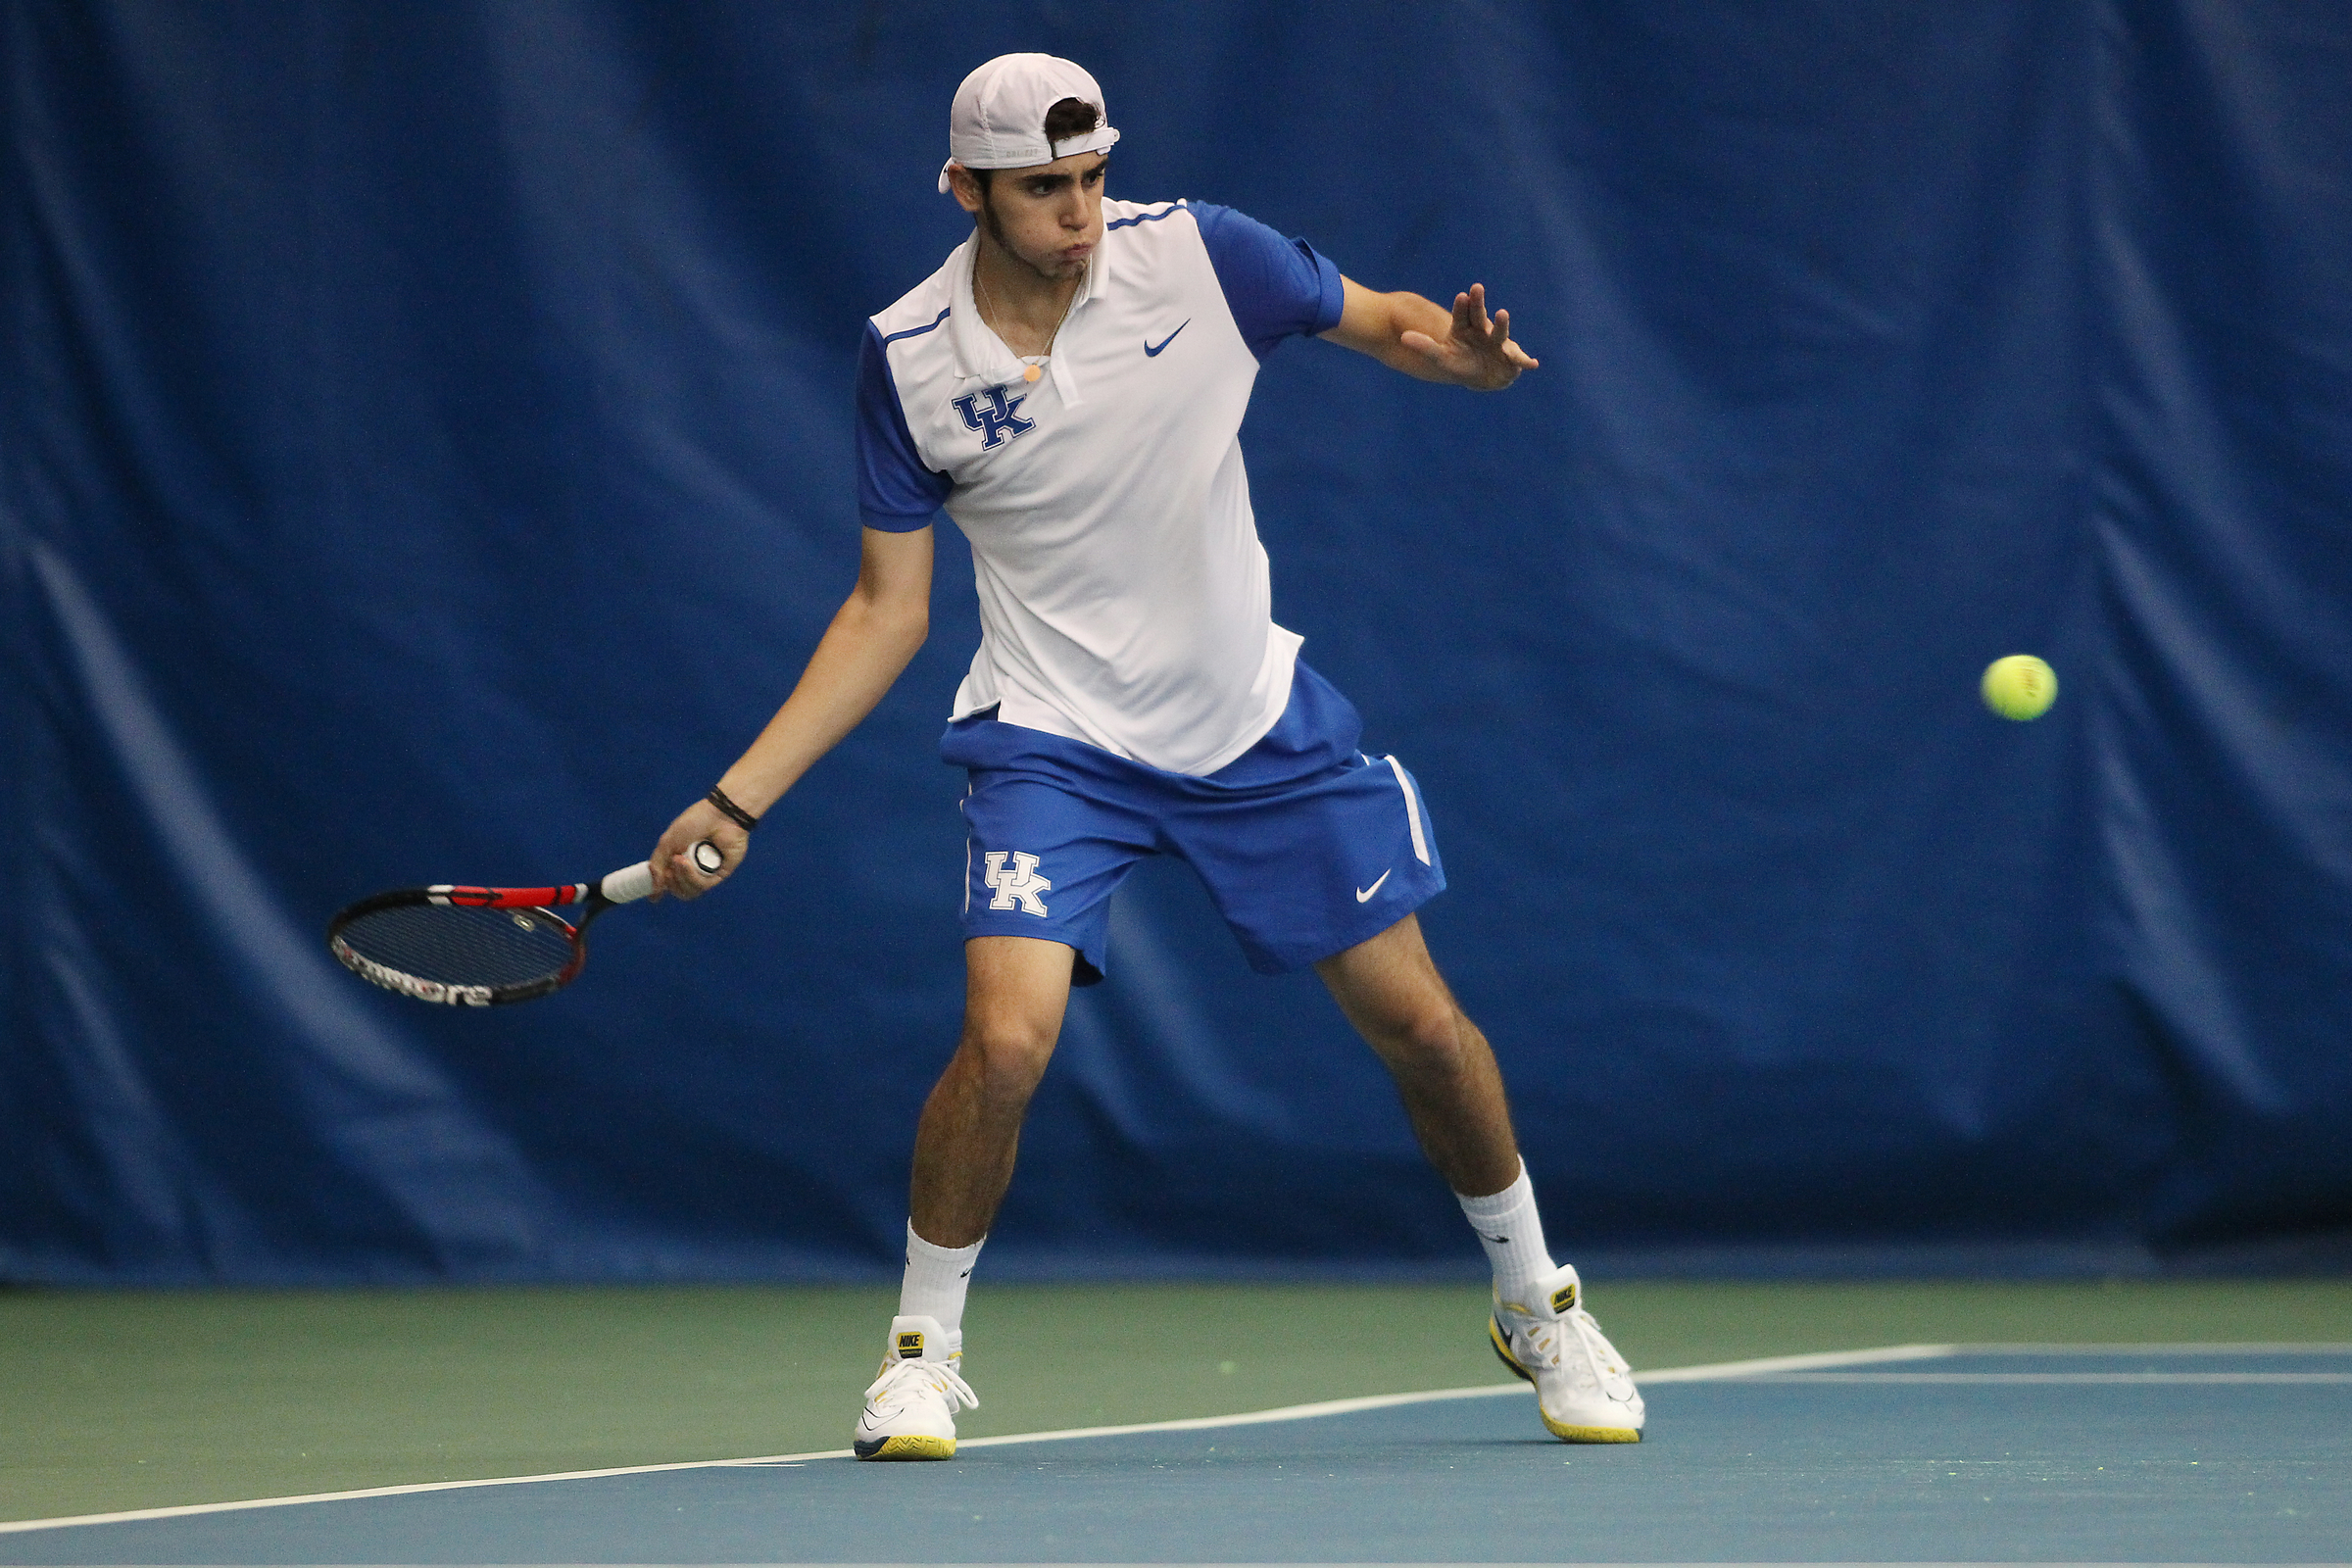 Four Wildcats Advance to Day Three of ITA Regional Championships